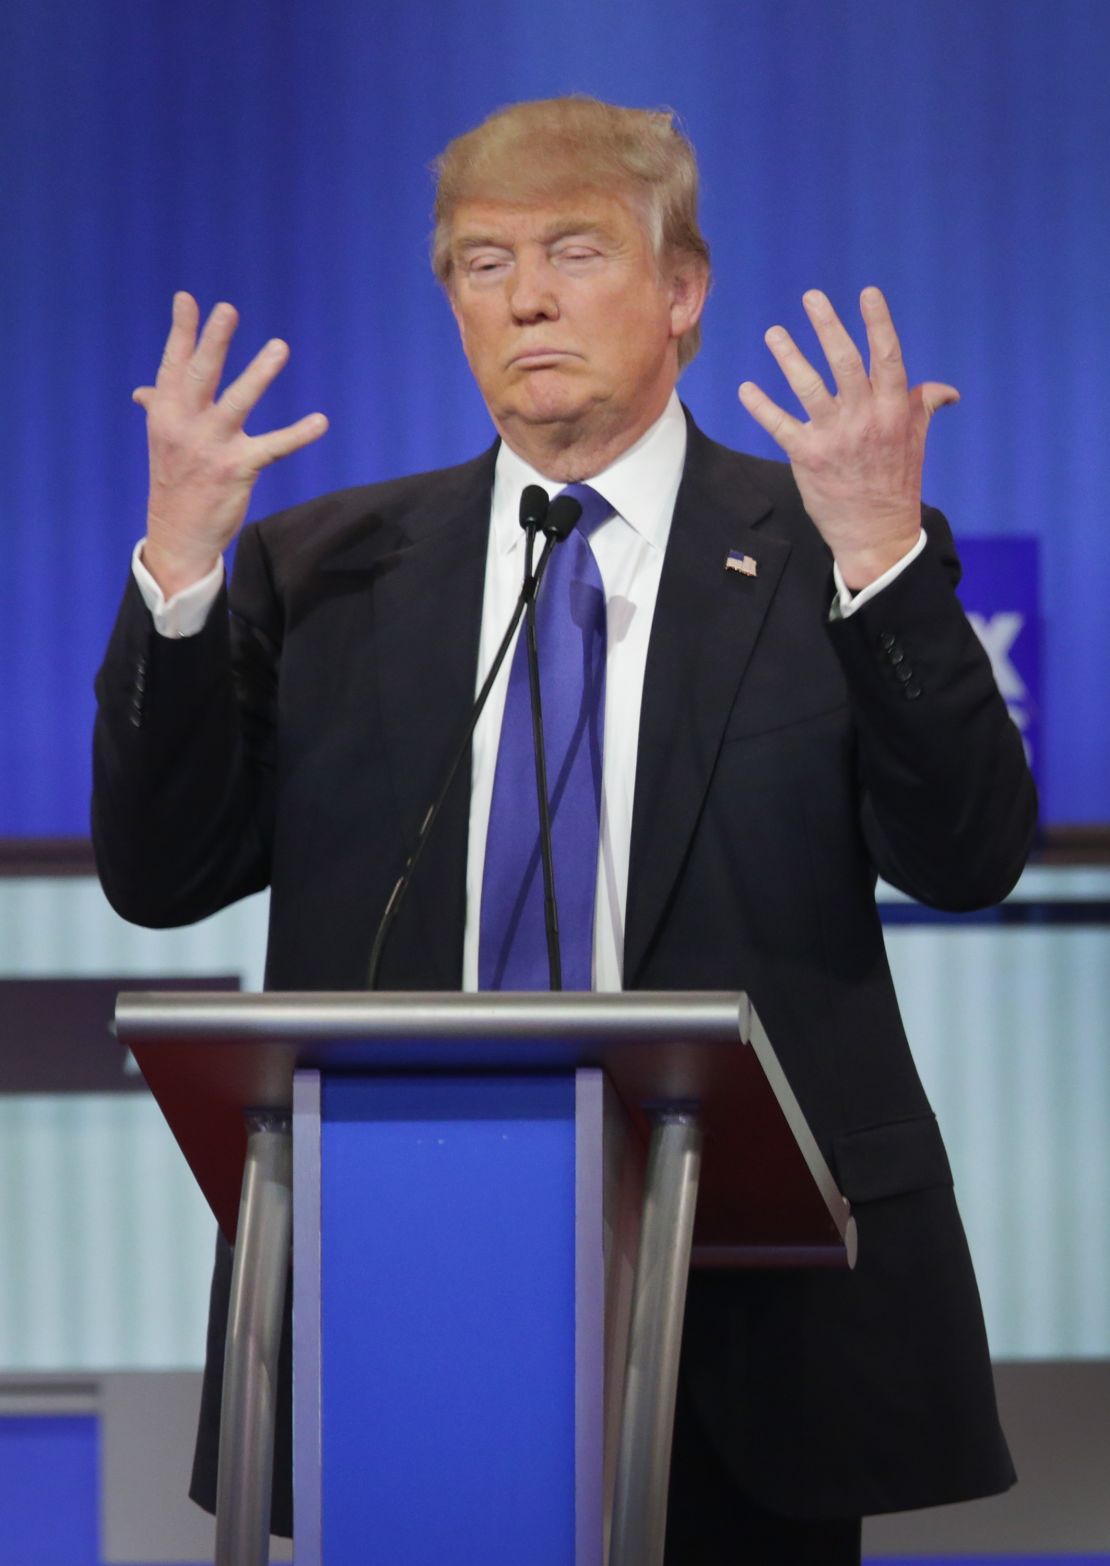 Donald Trump Still Doesn't Want Us to Think He Has Small Hands